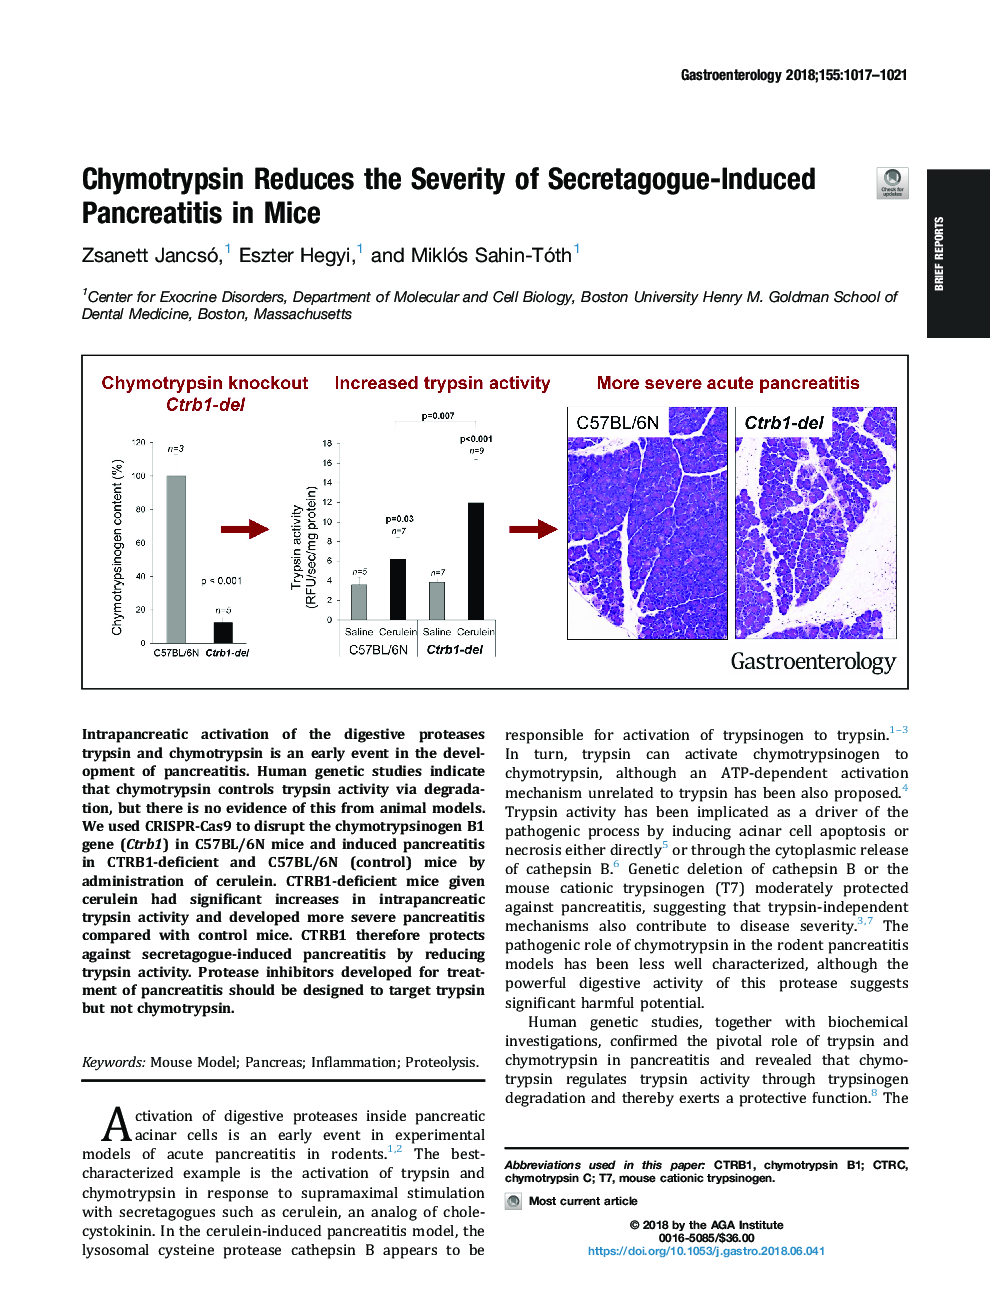 Chymotrypsin Reduces the Severity of Secretagogue-Induced Pancreatitis in Mice